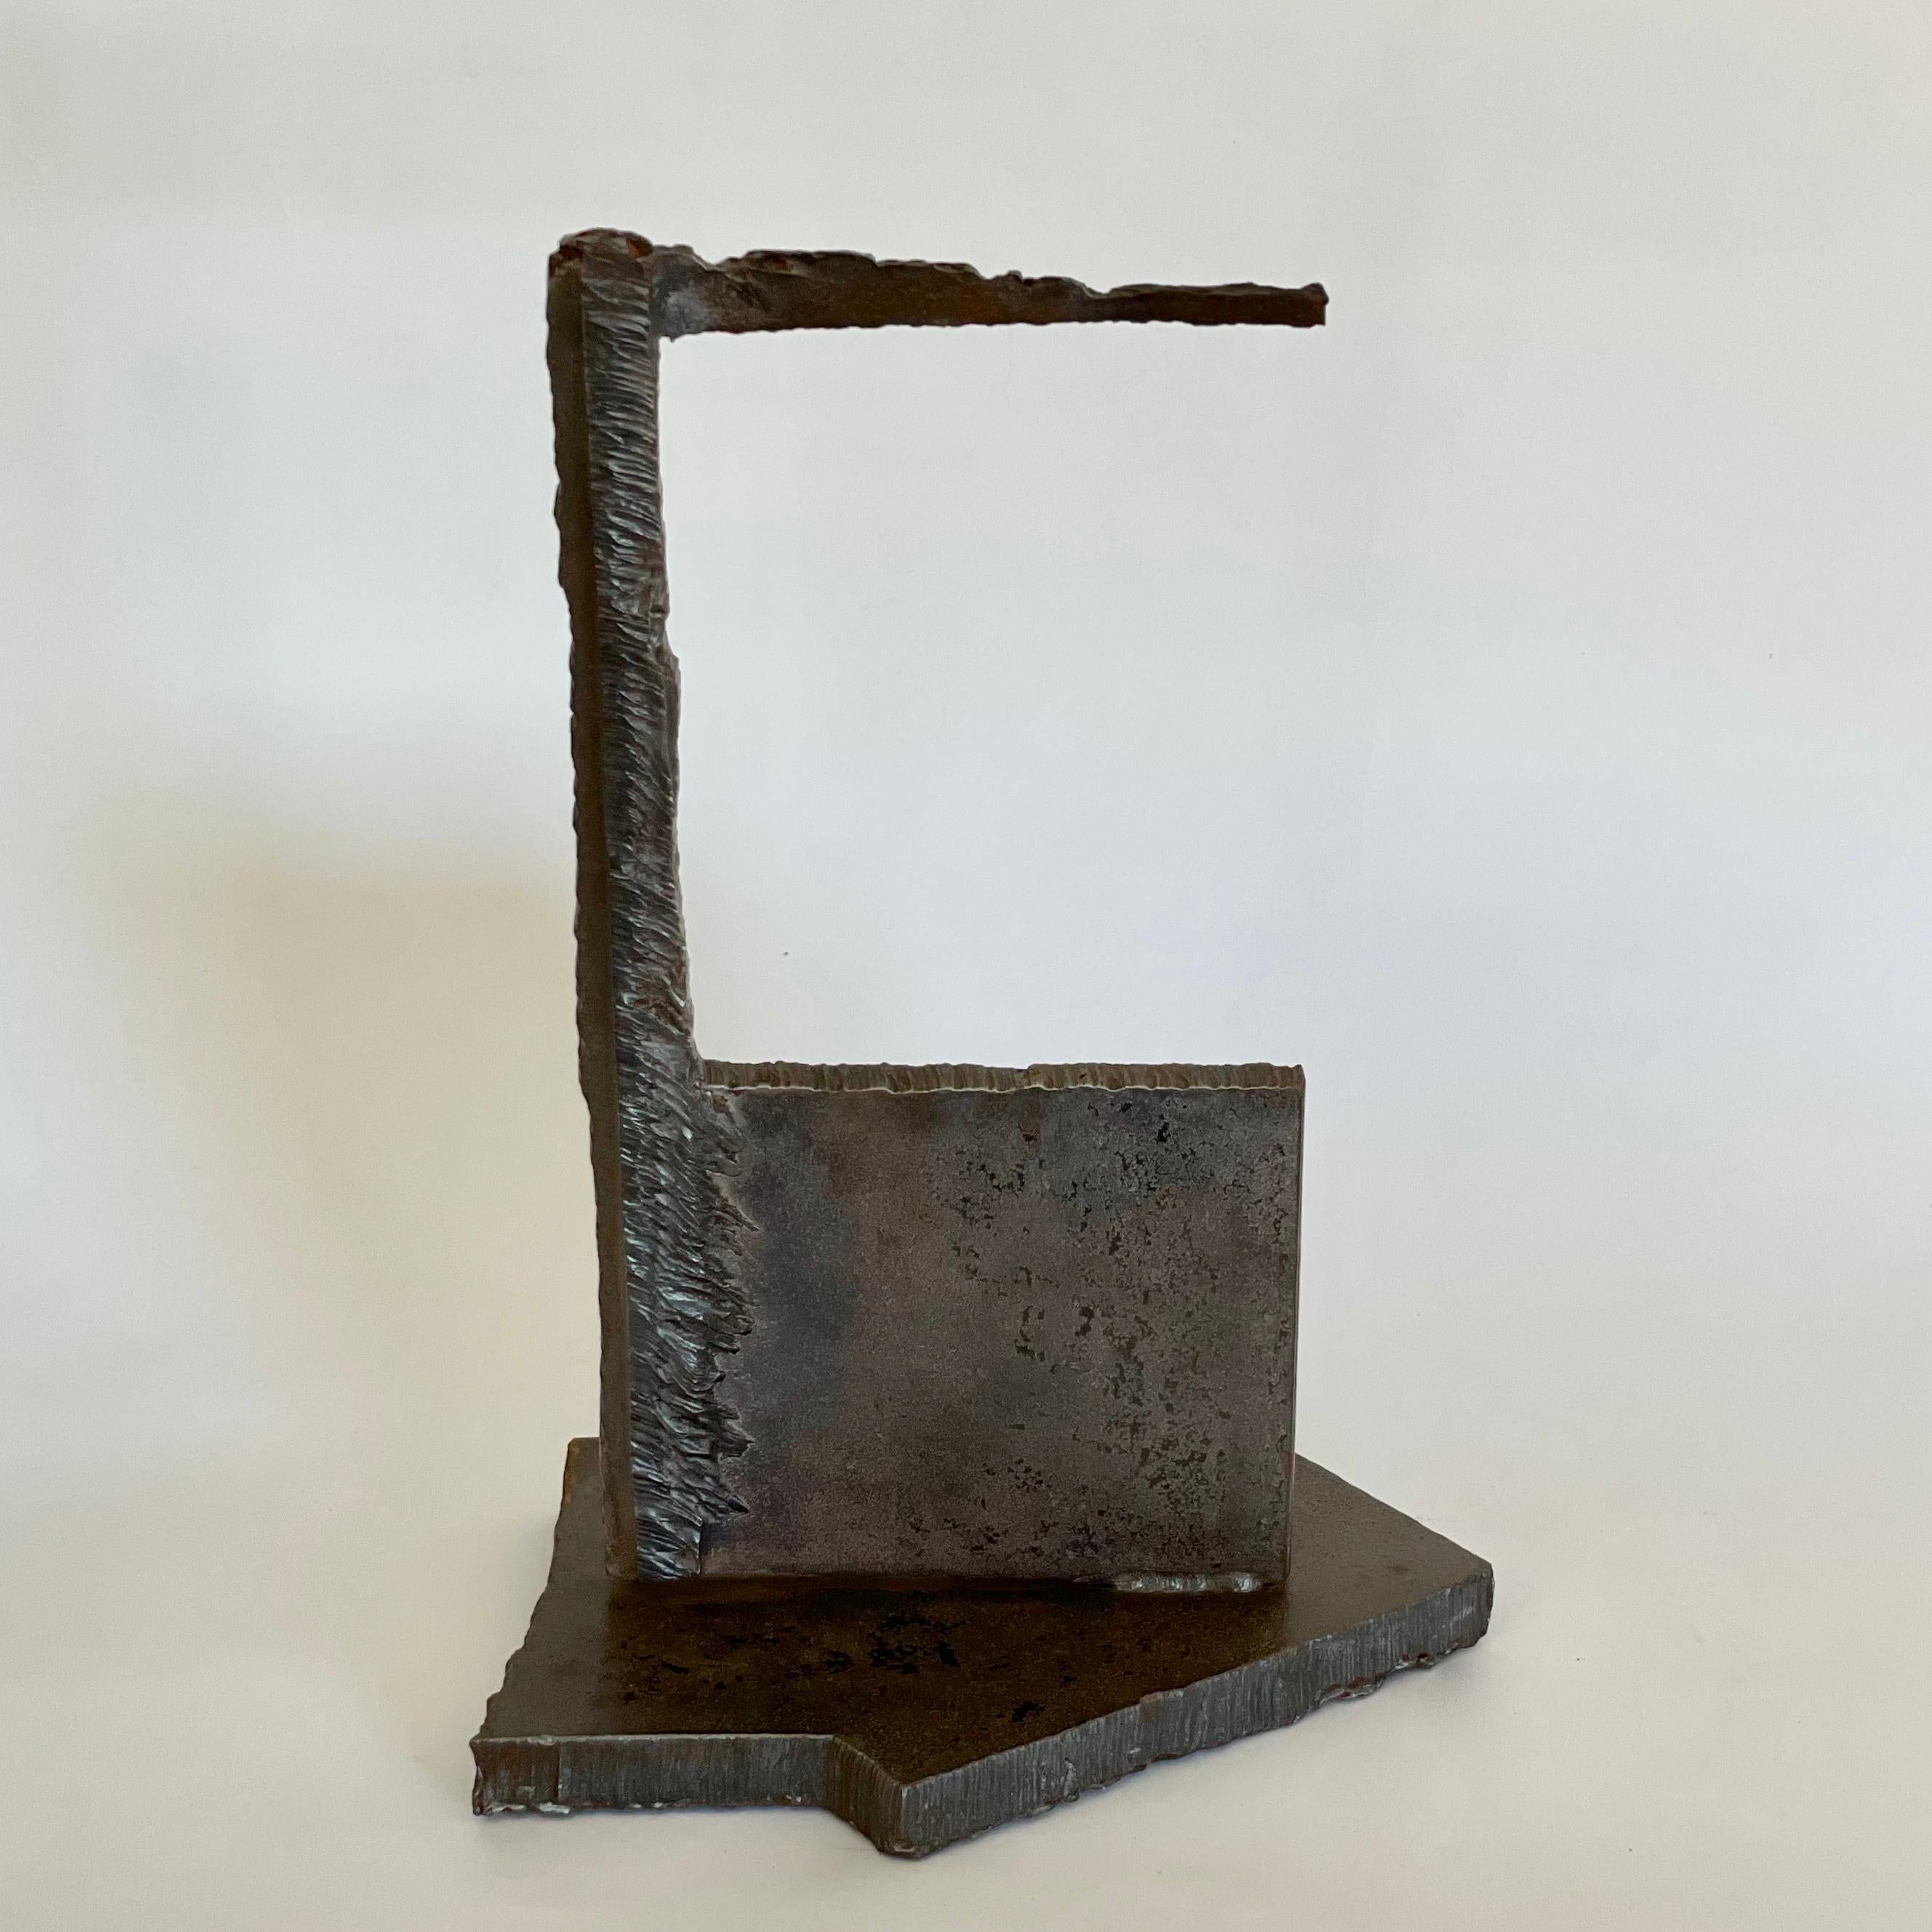 Portal
welded steel
Measures: 8.5 x 12.5 x 17.5 in.

Artist statement:

I seldom use stock material, but prefer distressed and rusted steel that has been scarred, bent, and made imperfect. In this state, the material becomes quite beautiful.